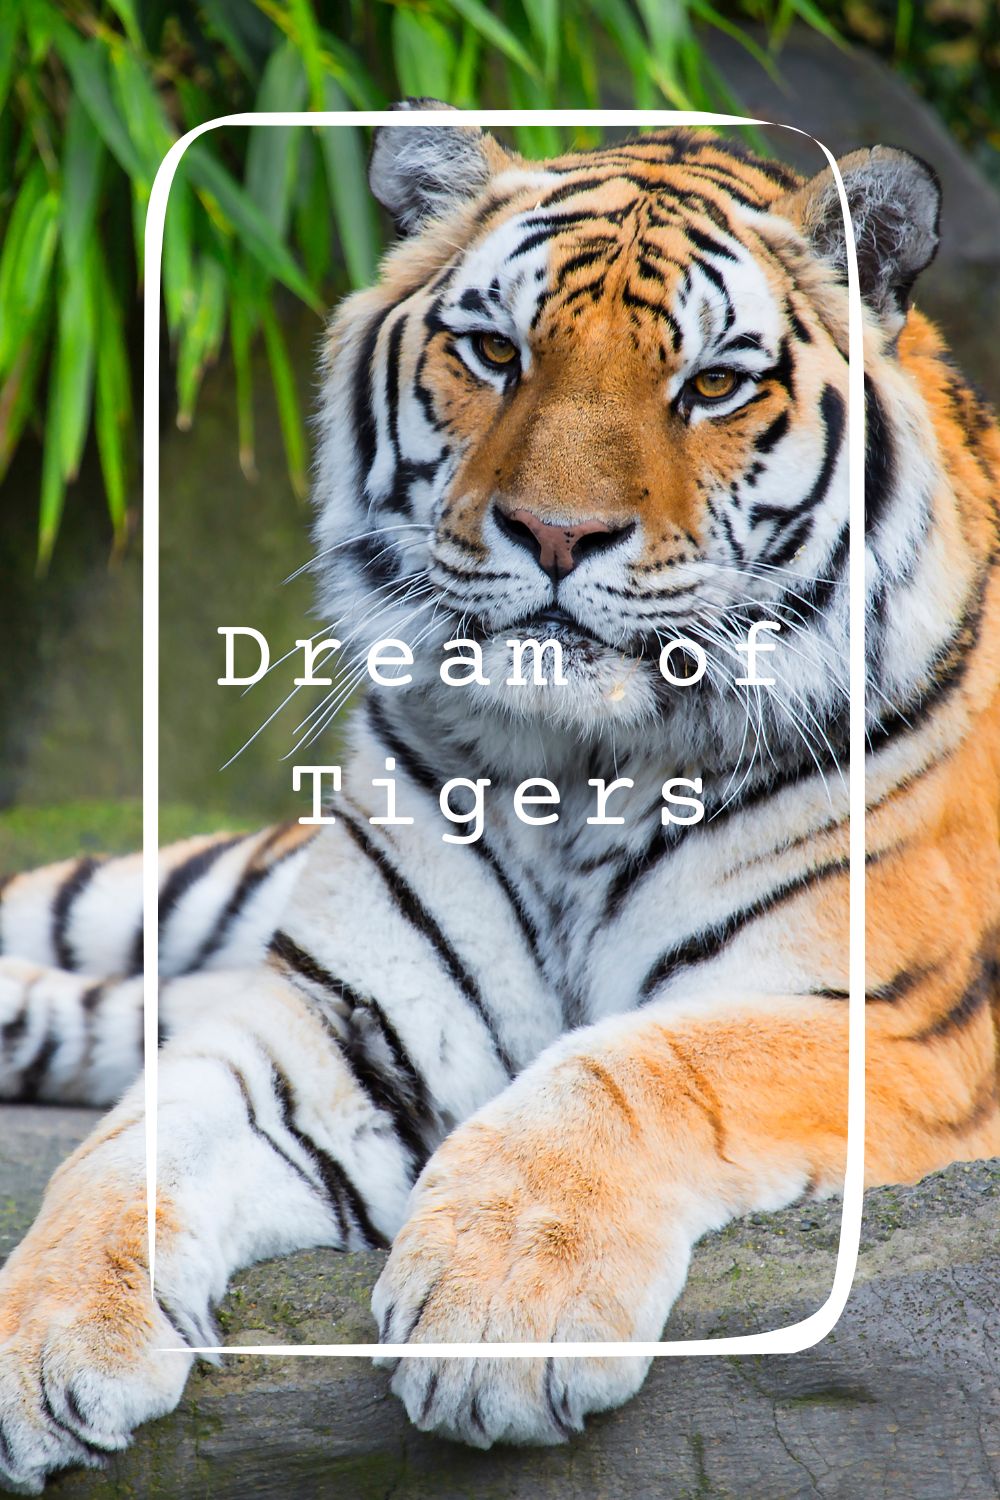 17 Dream of Tigers Meanings4